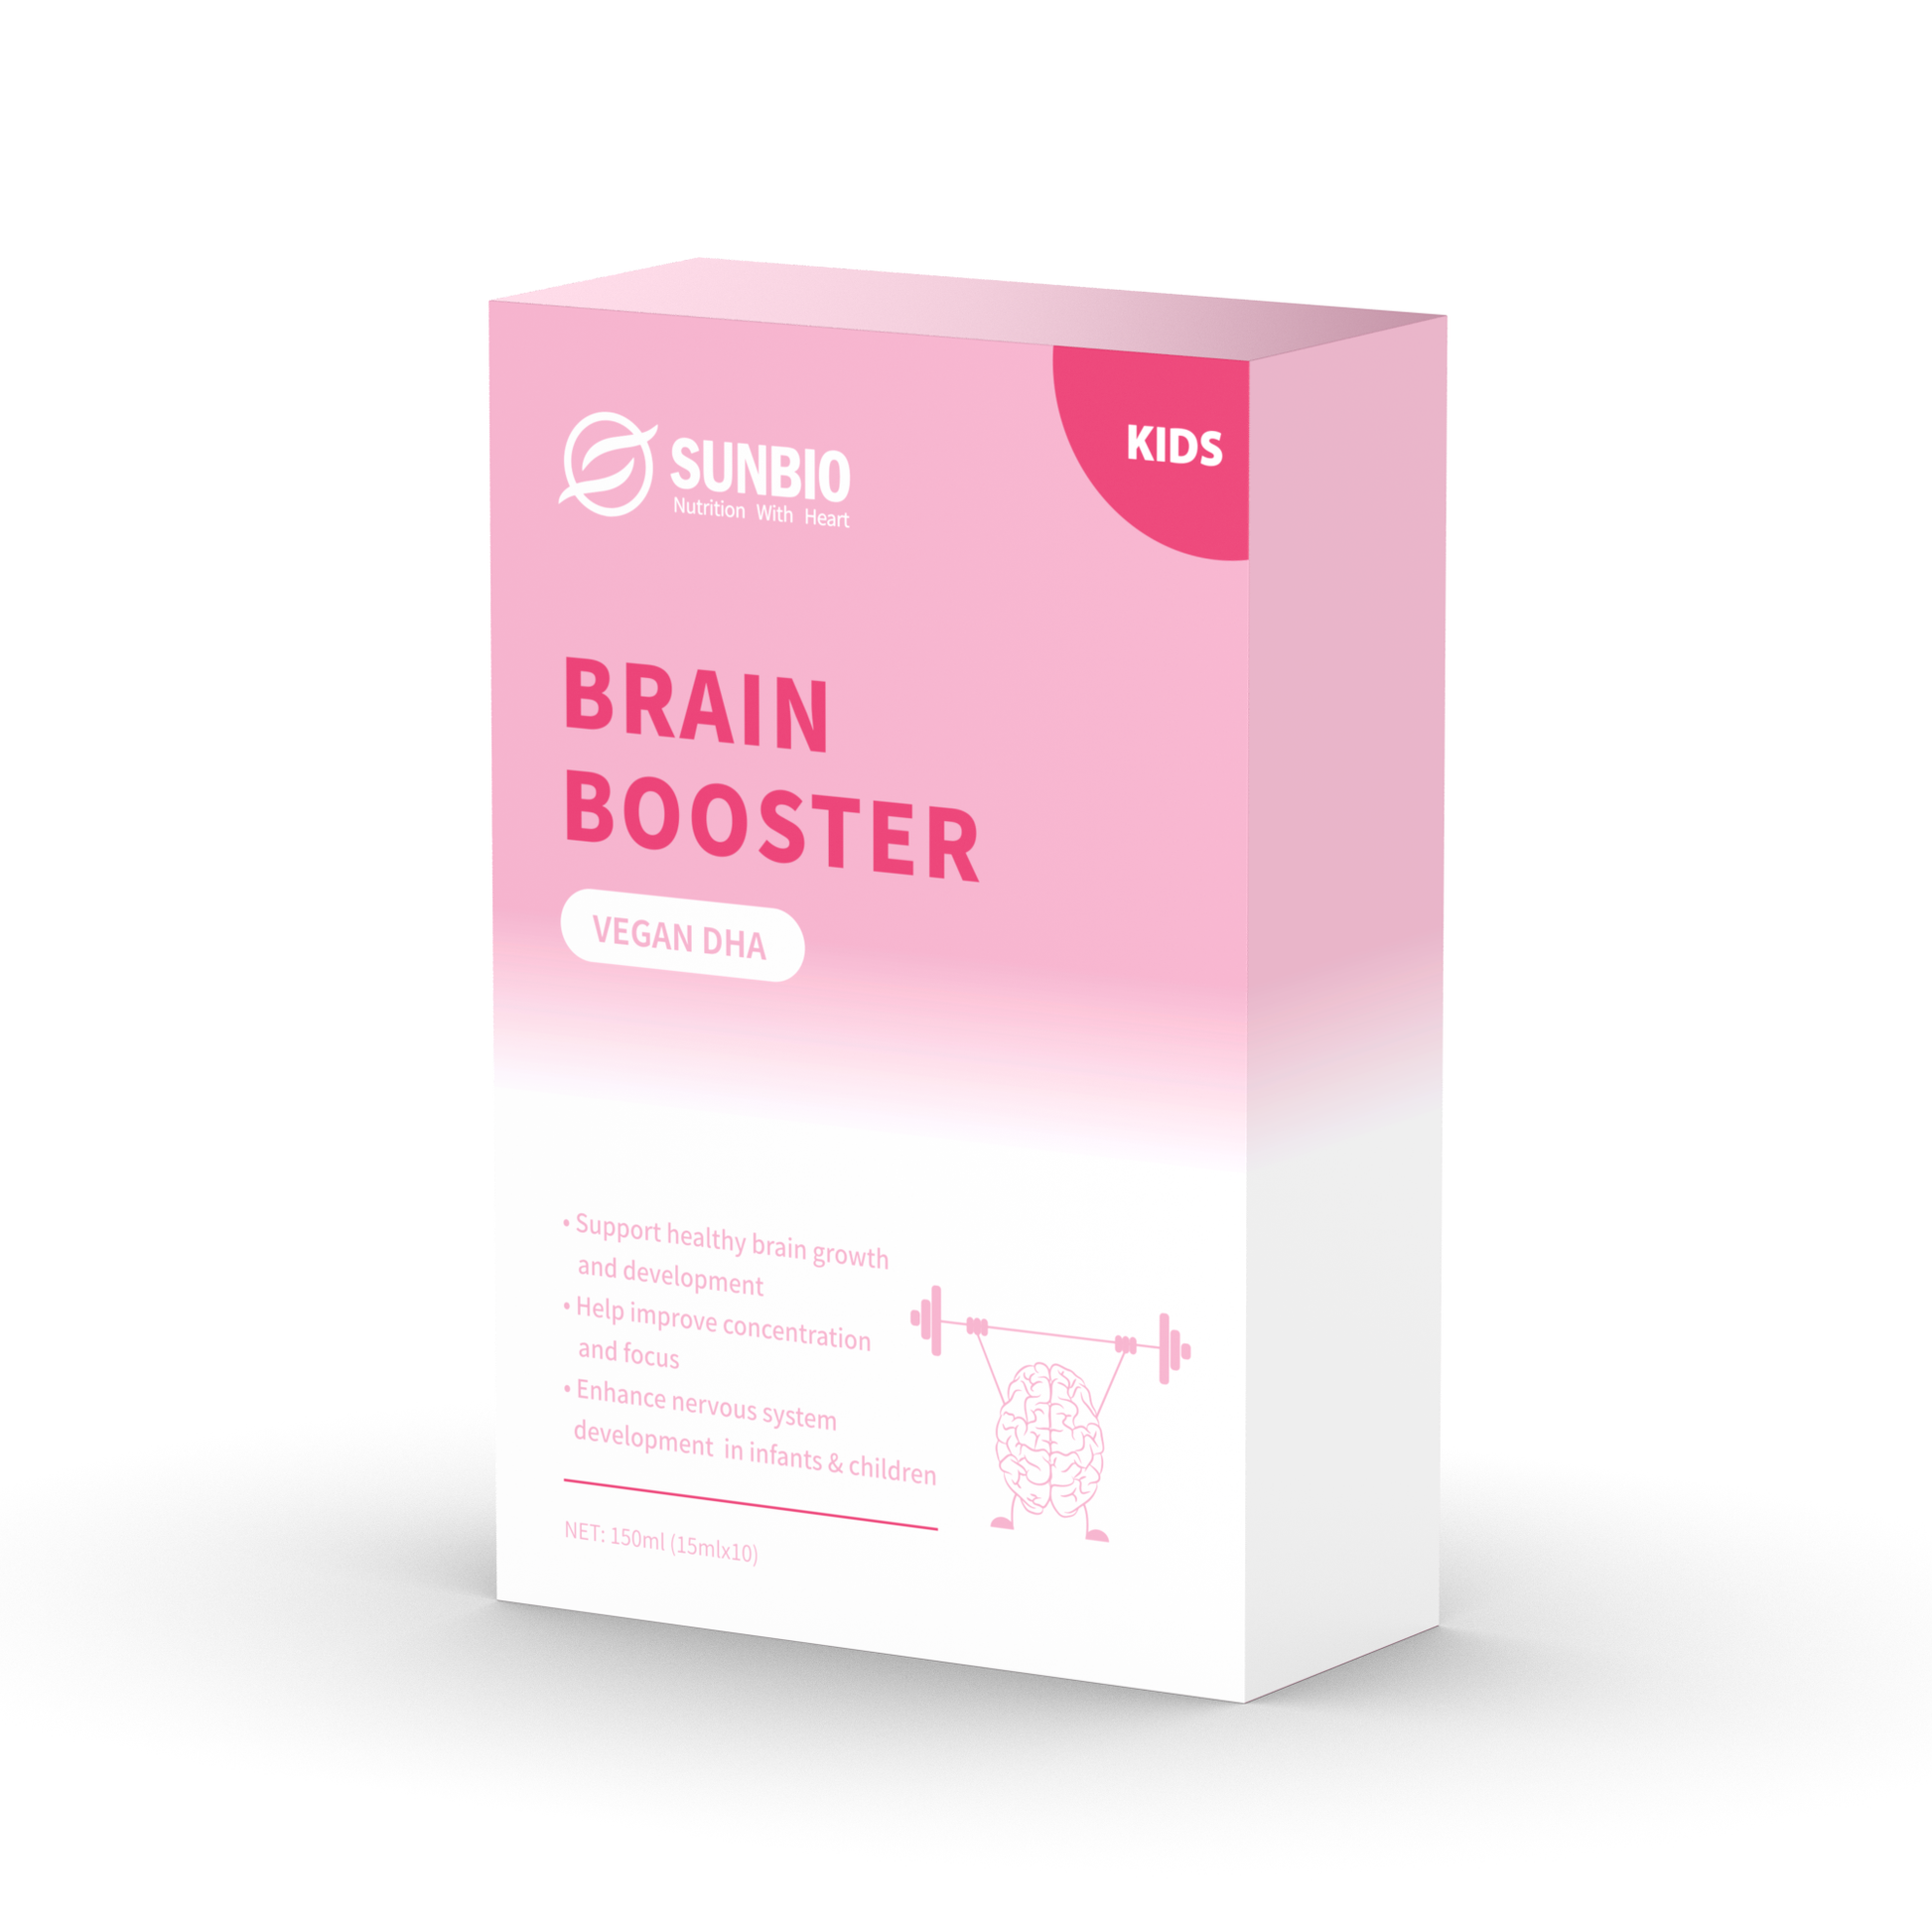 Brain Booster Vegan DHA Nutritional Drink Carton Front Side